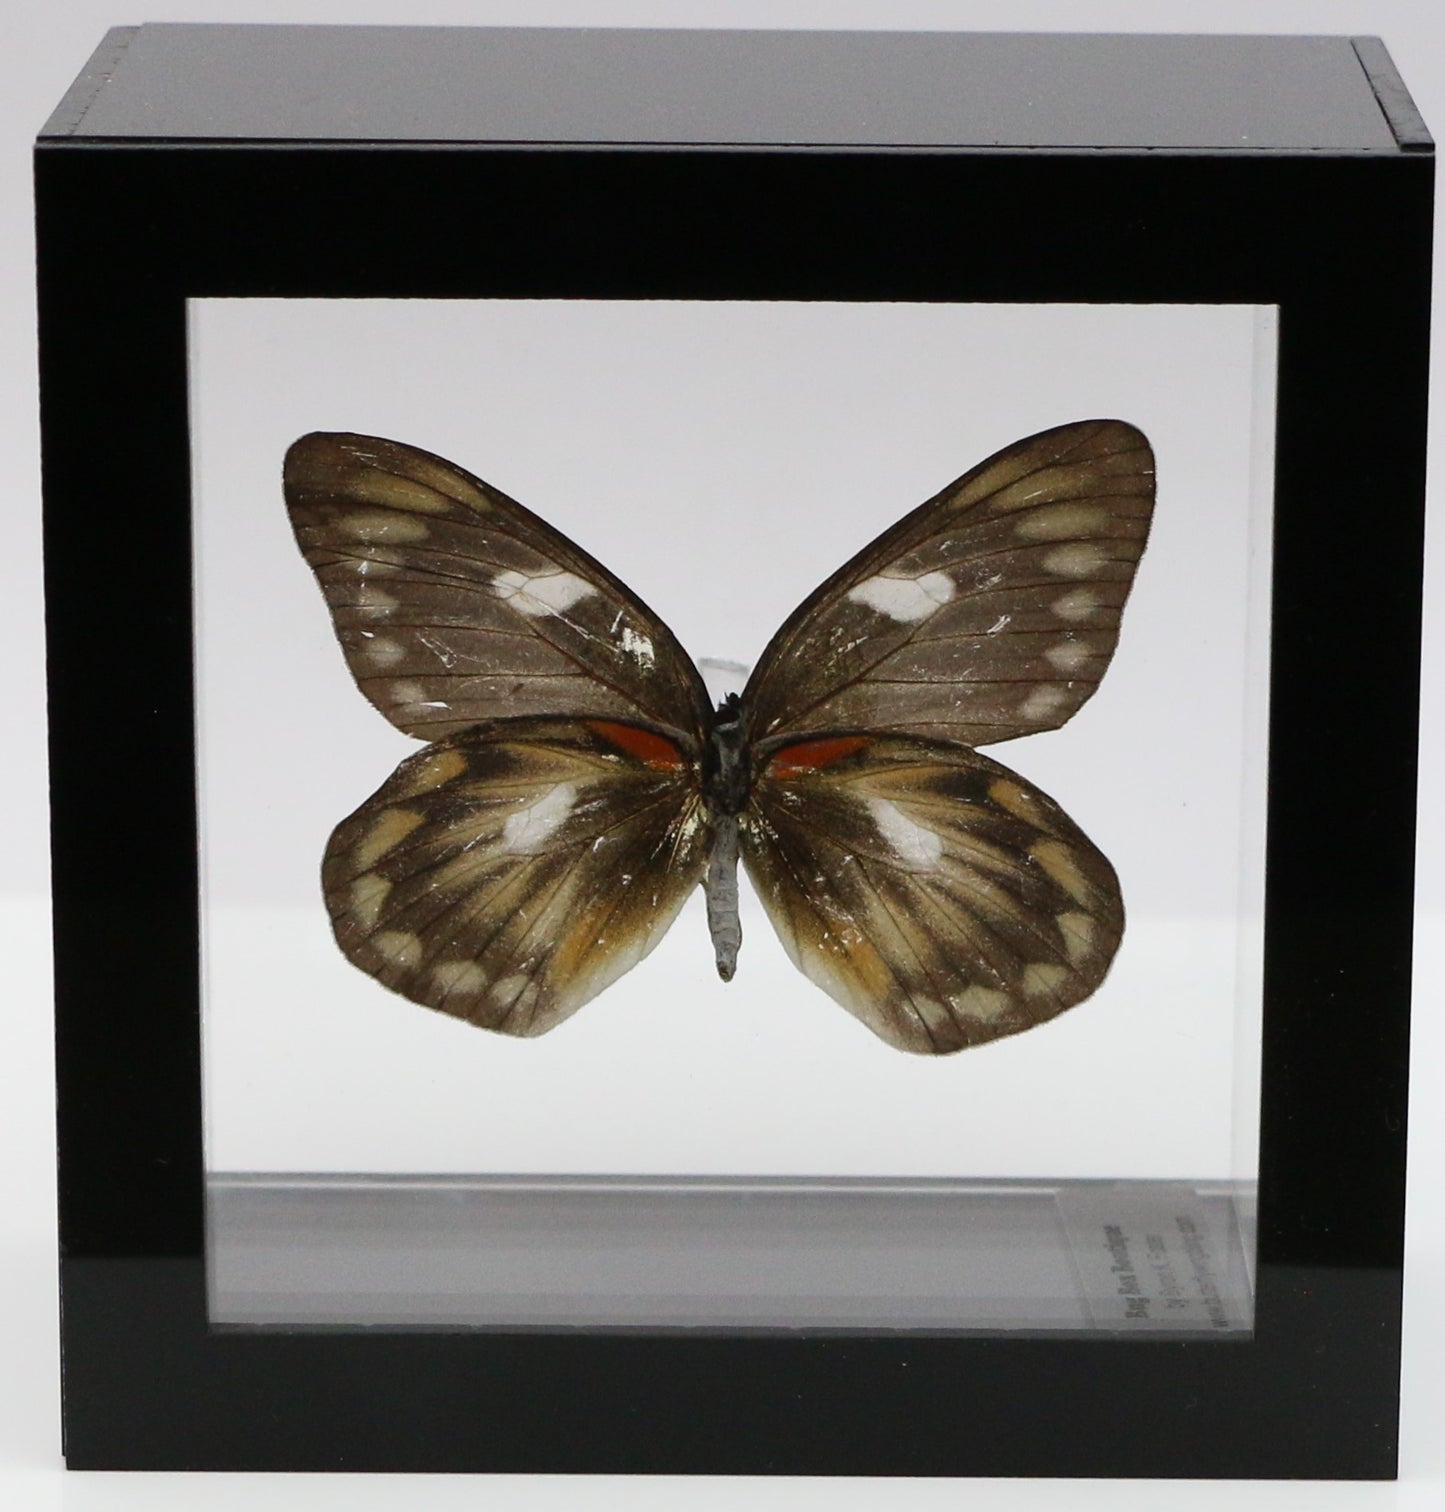 9040416 - Real Butterfly Acrylic Display Box - 4" X 4" - Red Spot Jezebel Butterfly (Delias zubuda) - Female - Ventral